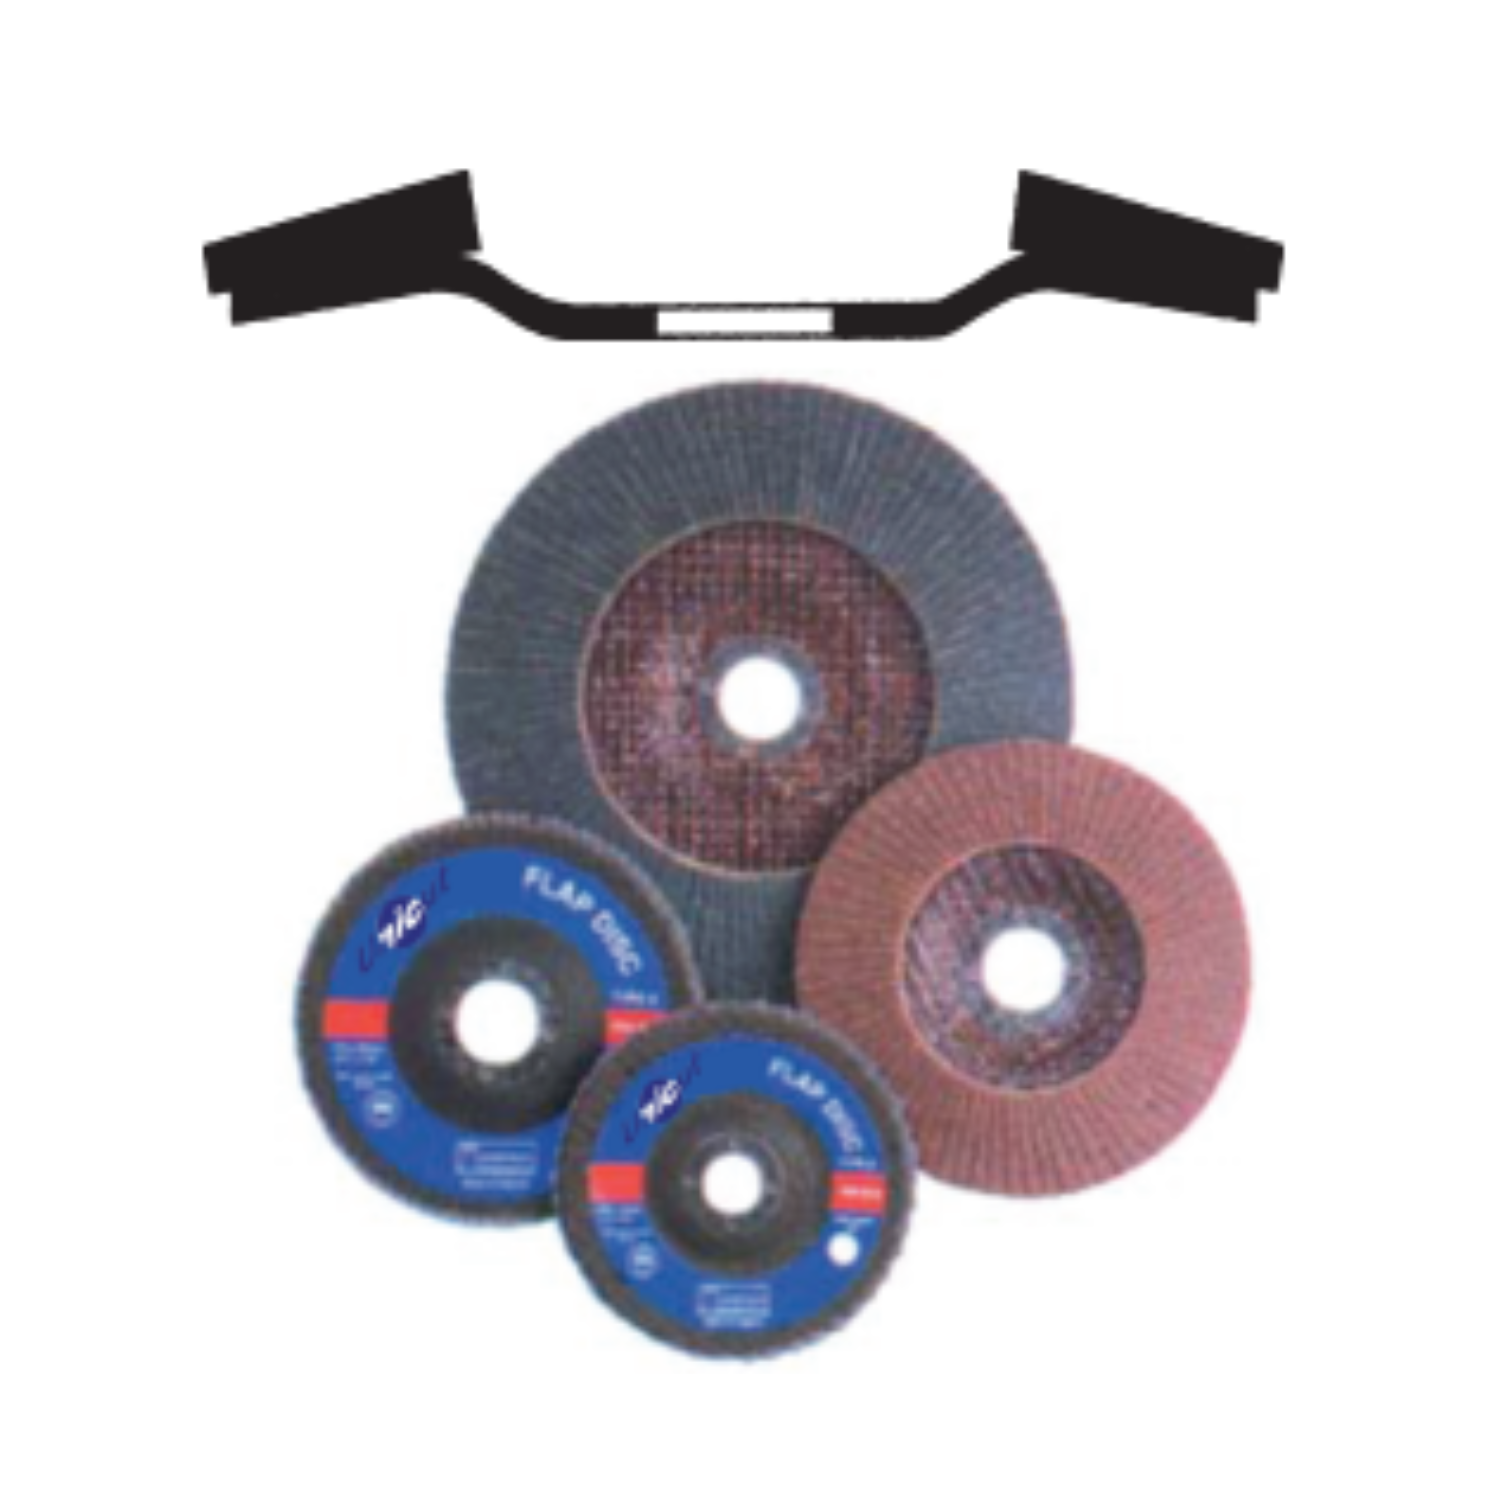 YEW AIK Flap Disc Type B – Lightweight Glass Fibre Backed - Premium Flap Disc from YEW AIK - Shop now at Yew Aik.